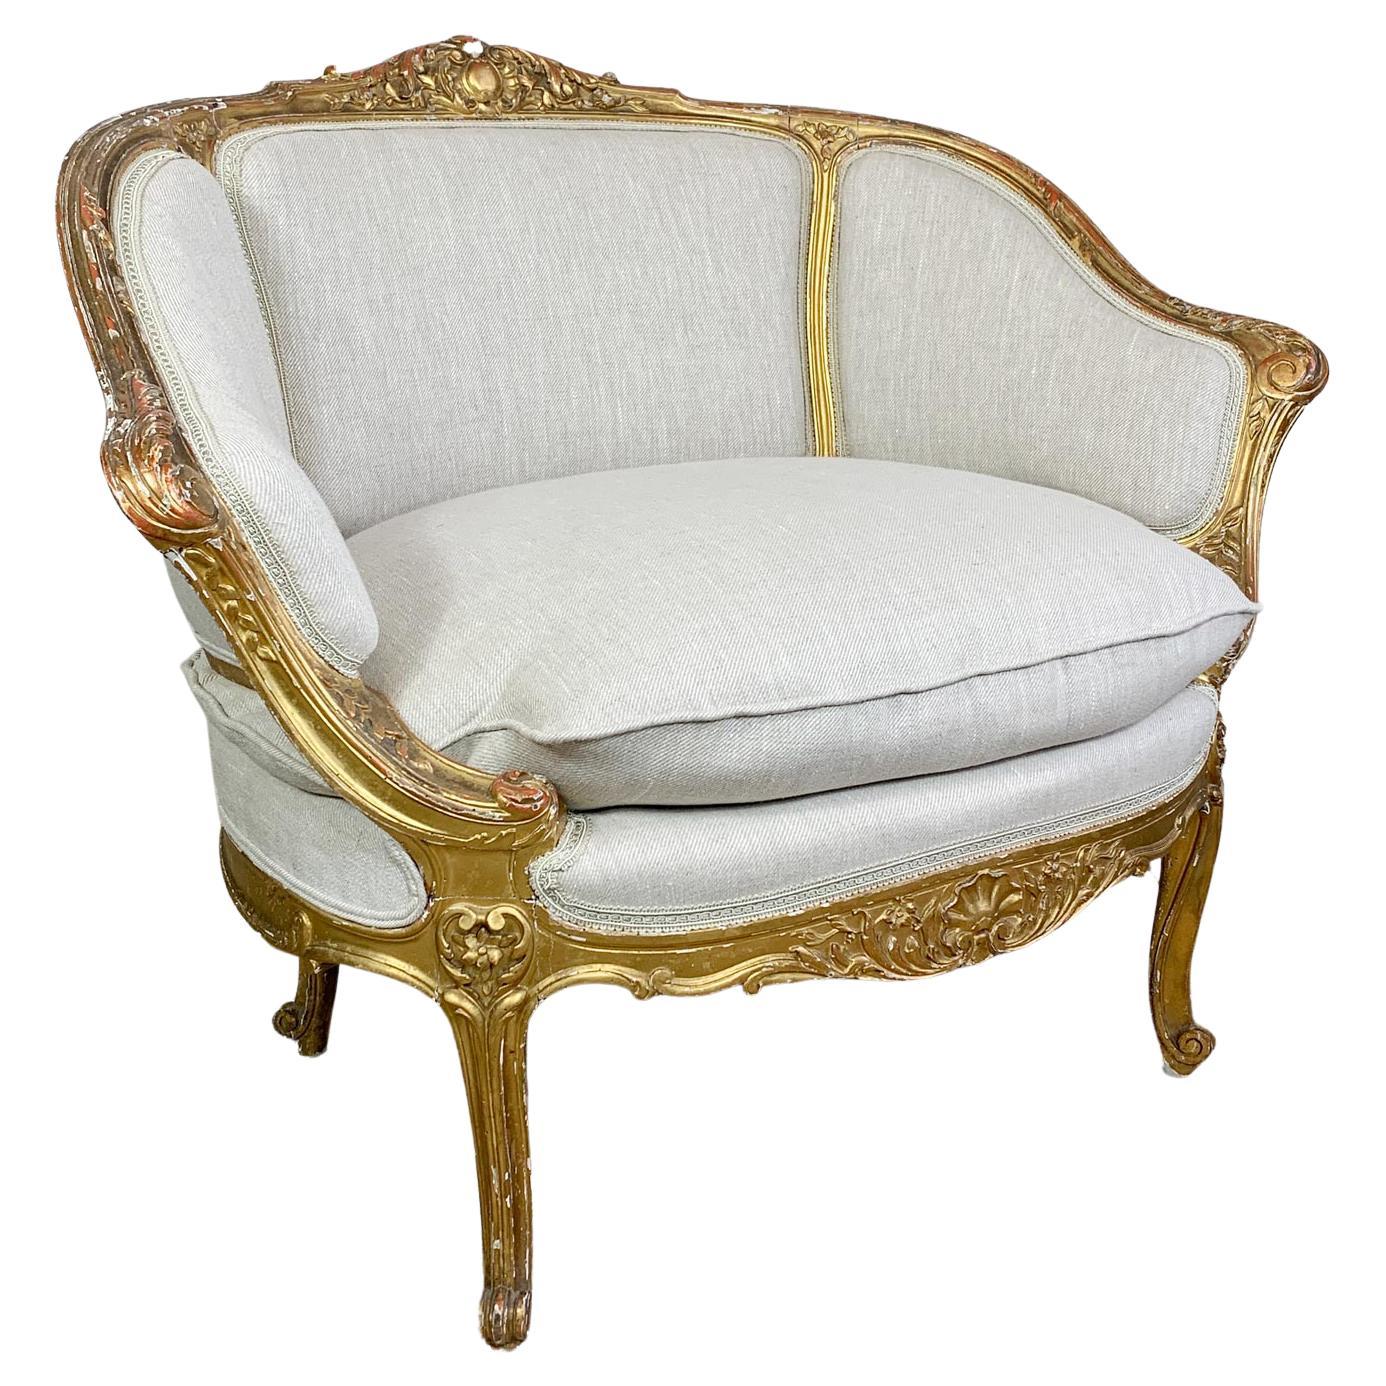 French 19th C Gilt Wood Louis XV Fauteuil Marquise Chair